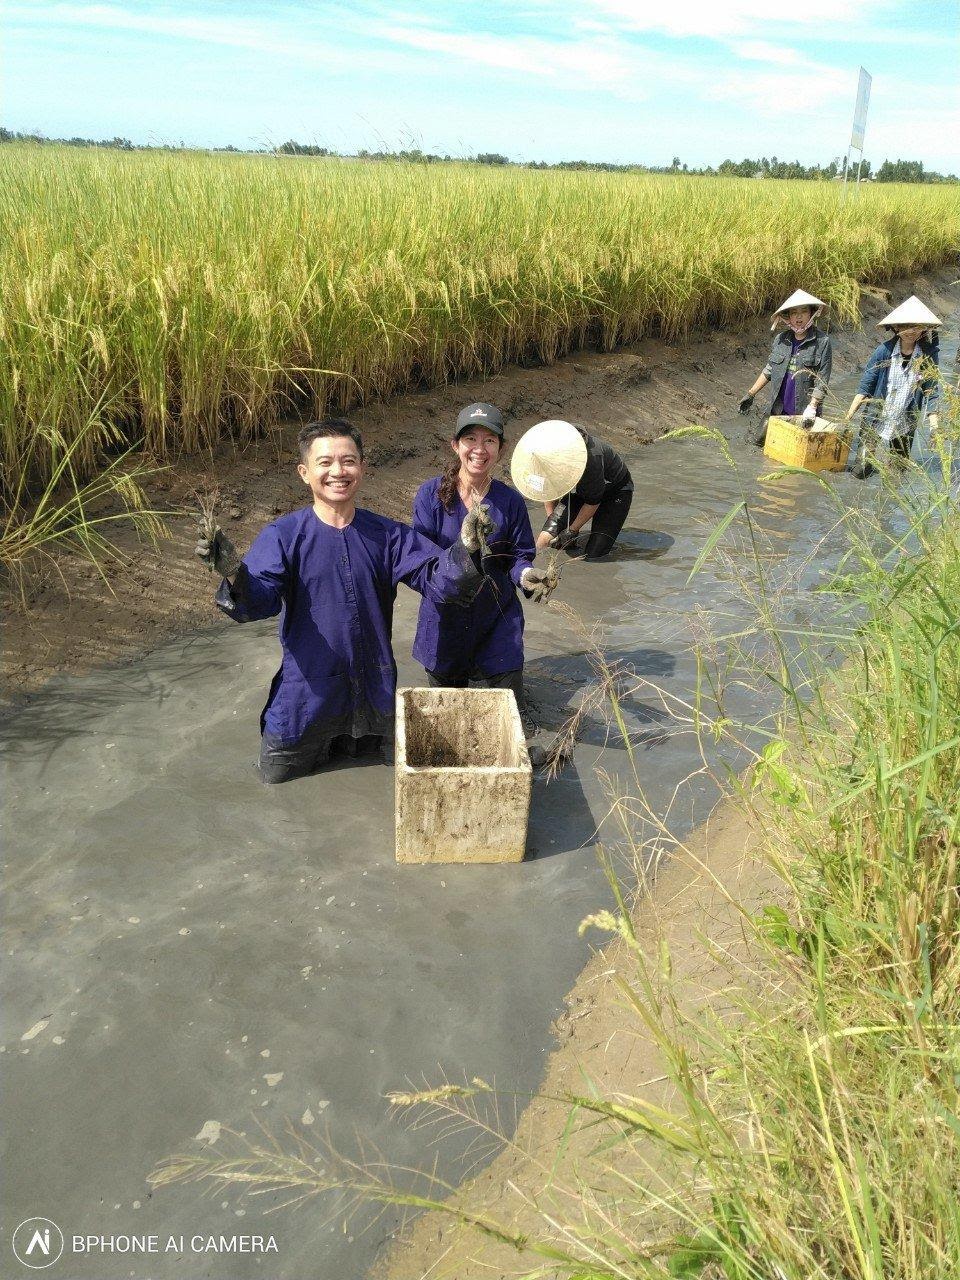 A group of people working in a rice fieldDescription automatically generated with low confidence